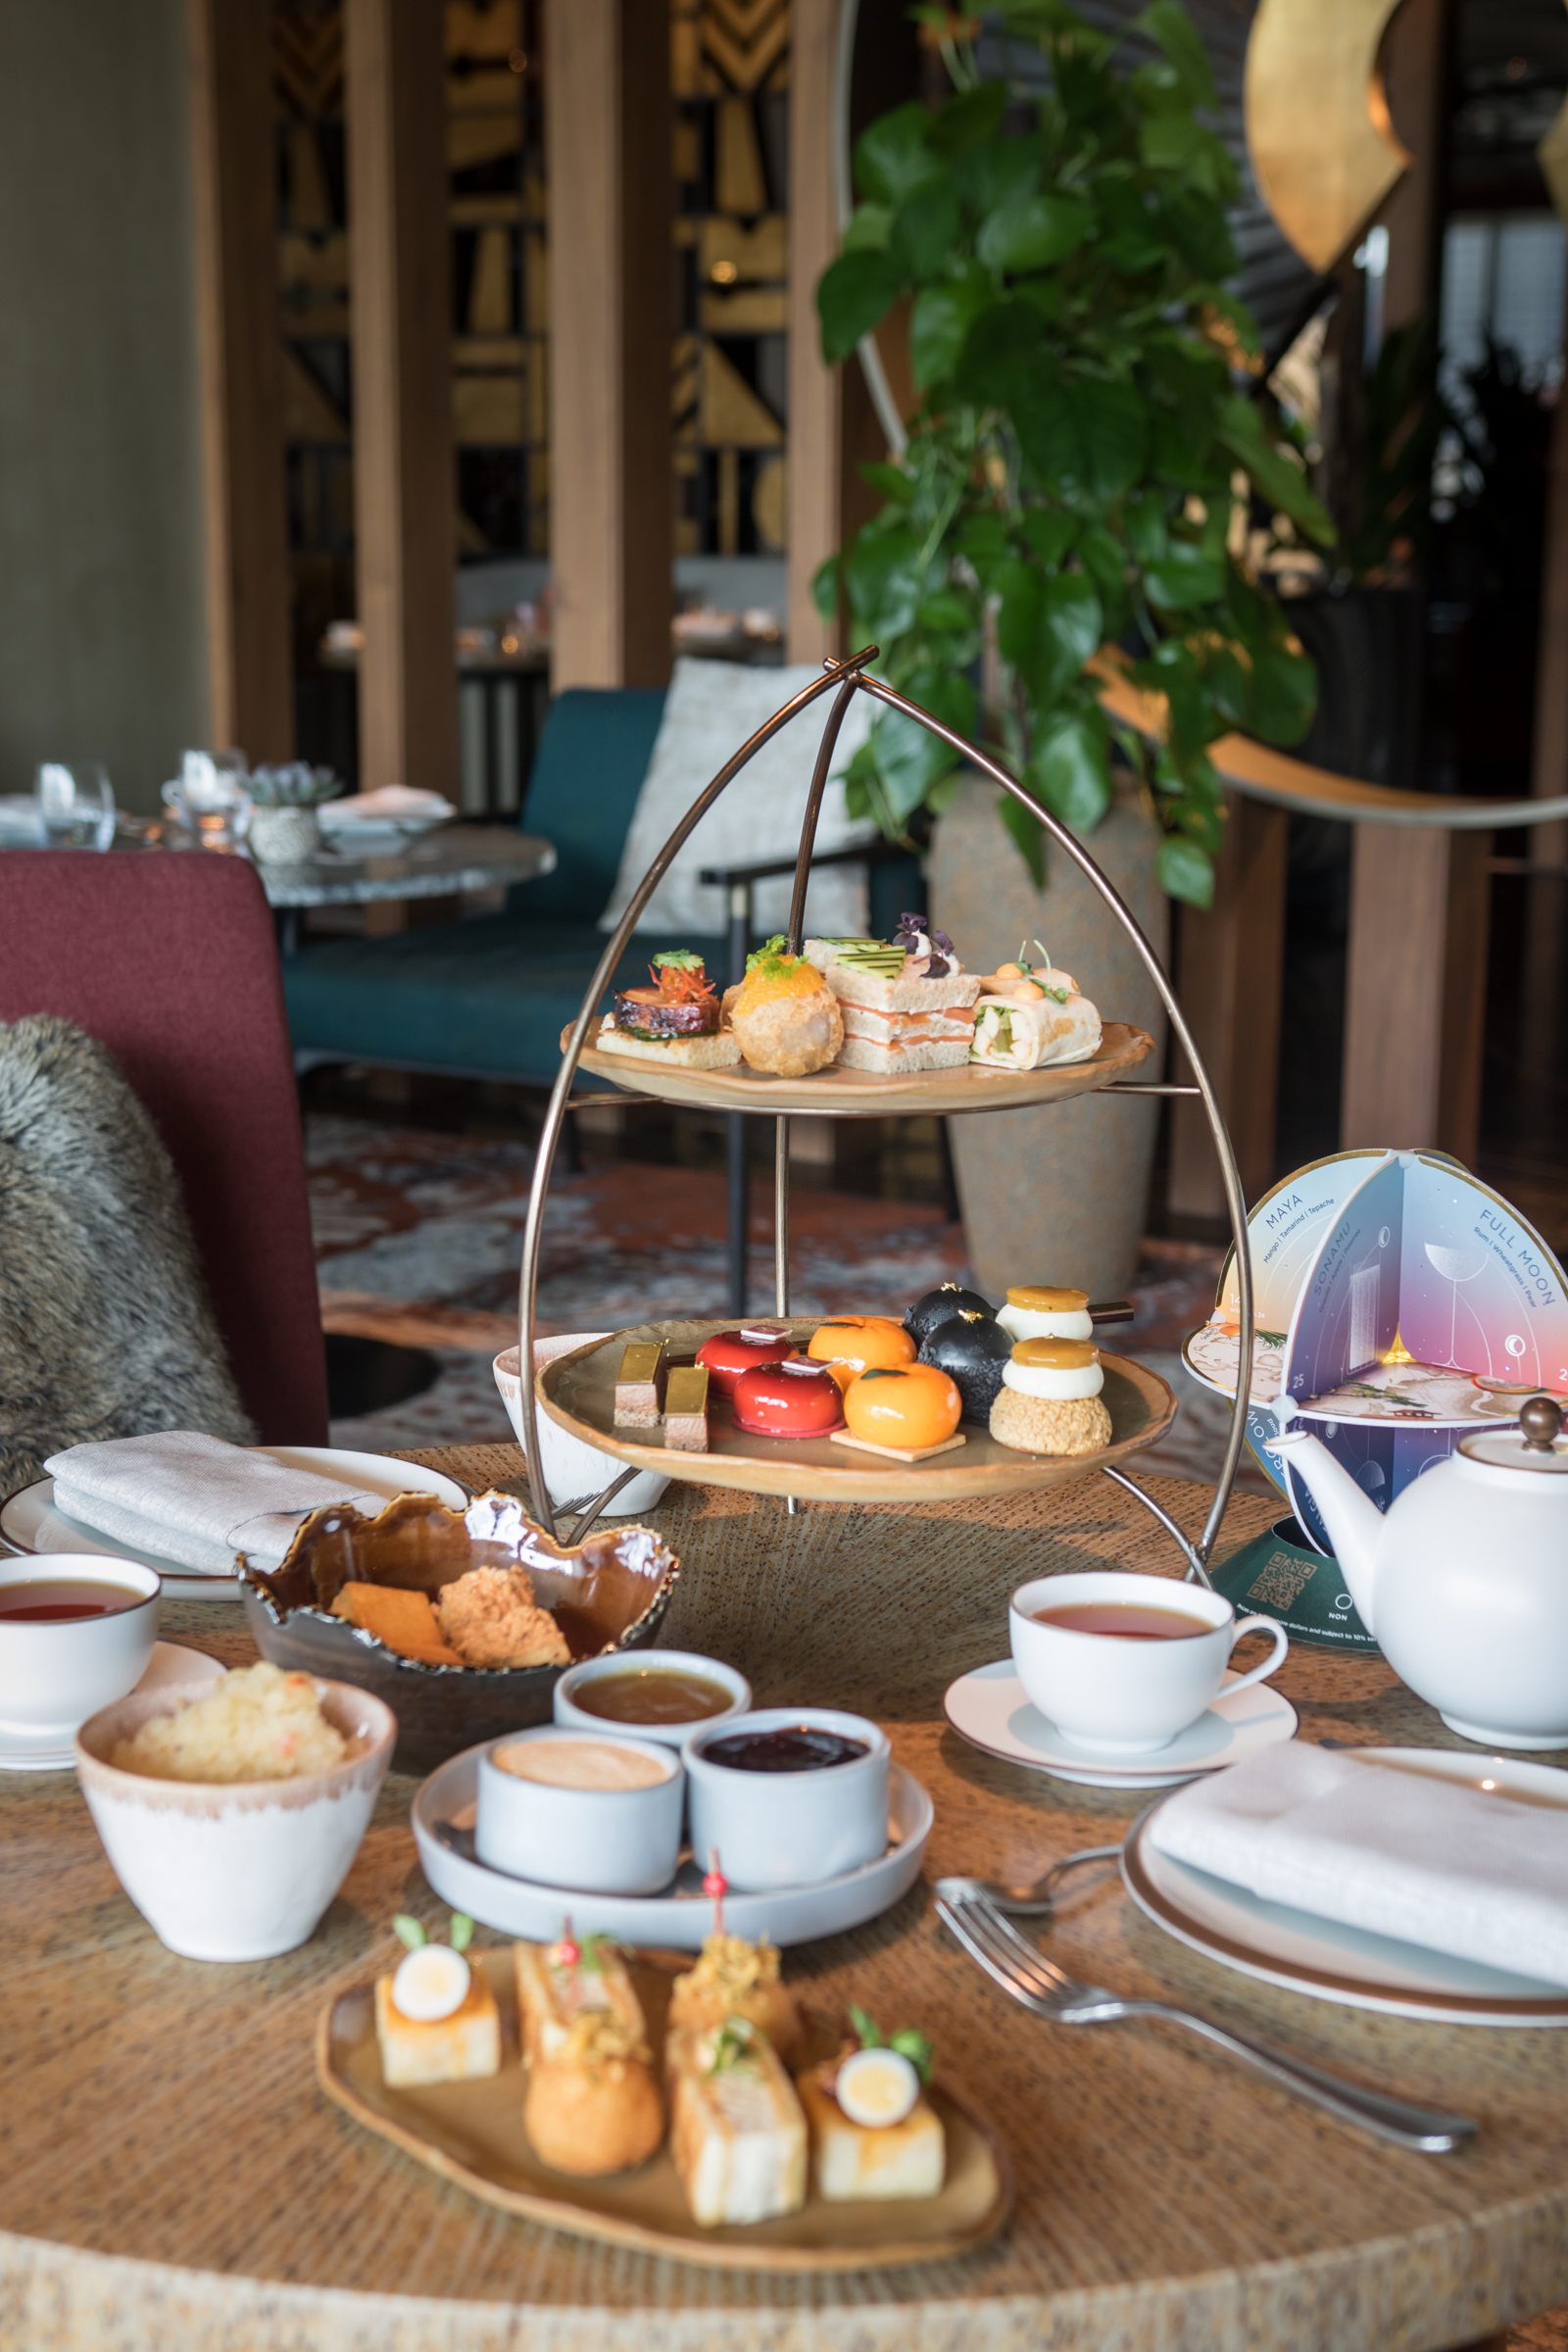 Ring in the Year of the Tiger with MO BAR’s Oriental Afternoon Tea Experience